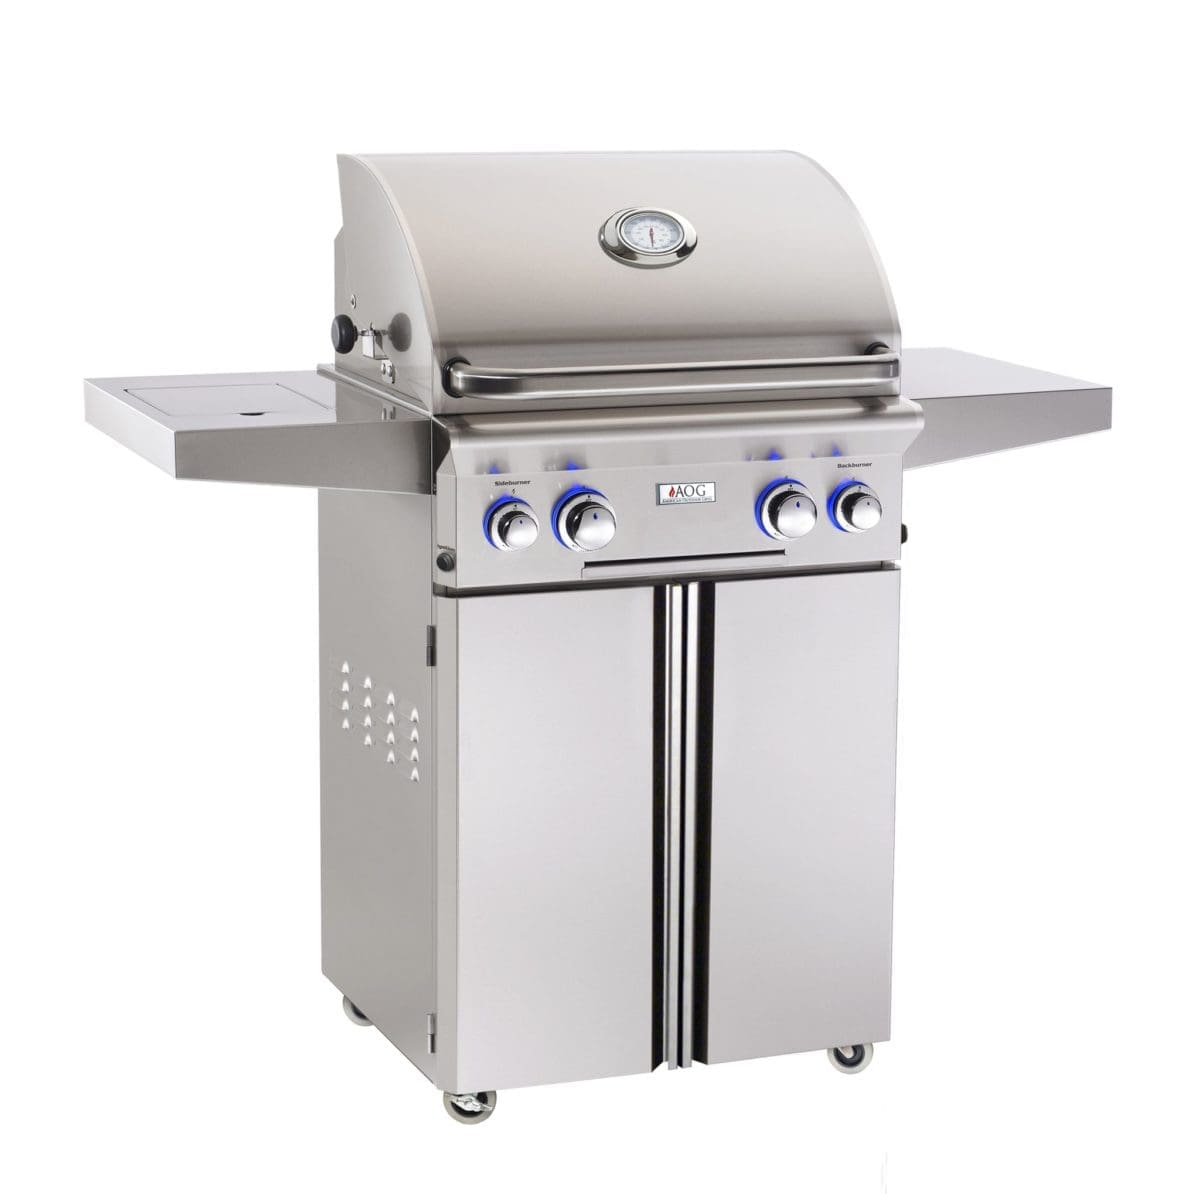 AOG 24PCL 24 L-Series Portable Grill